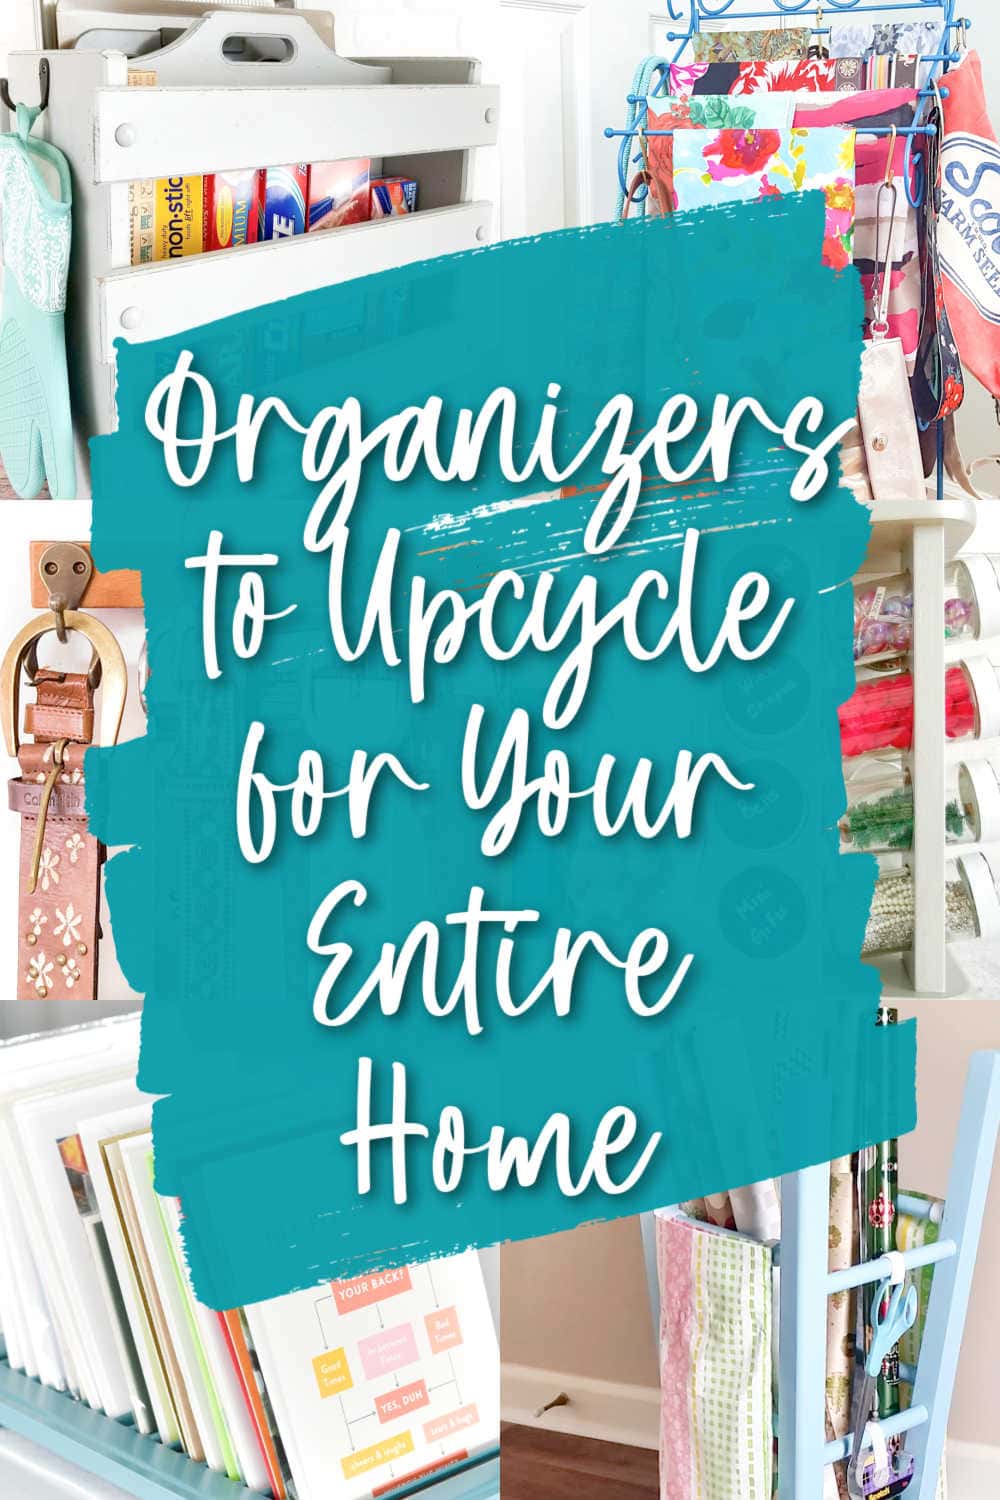 upcycled ideas for organizers and house storage